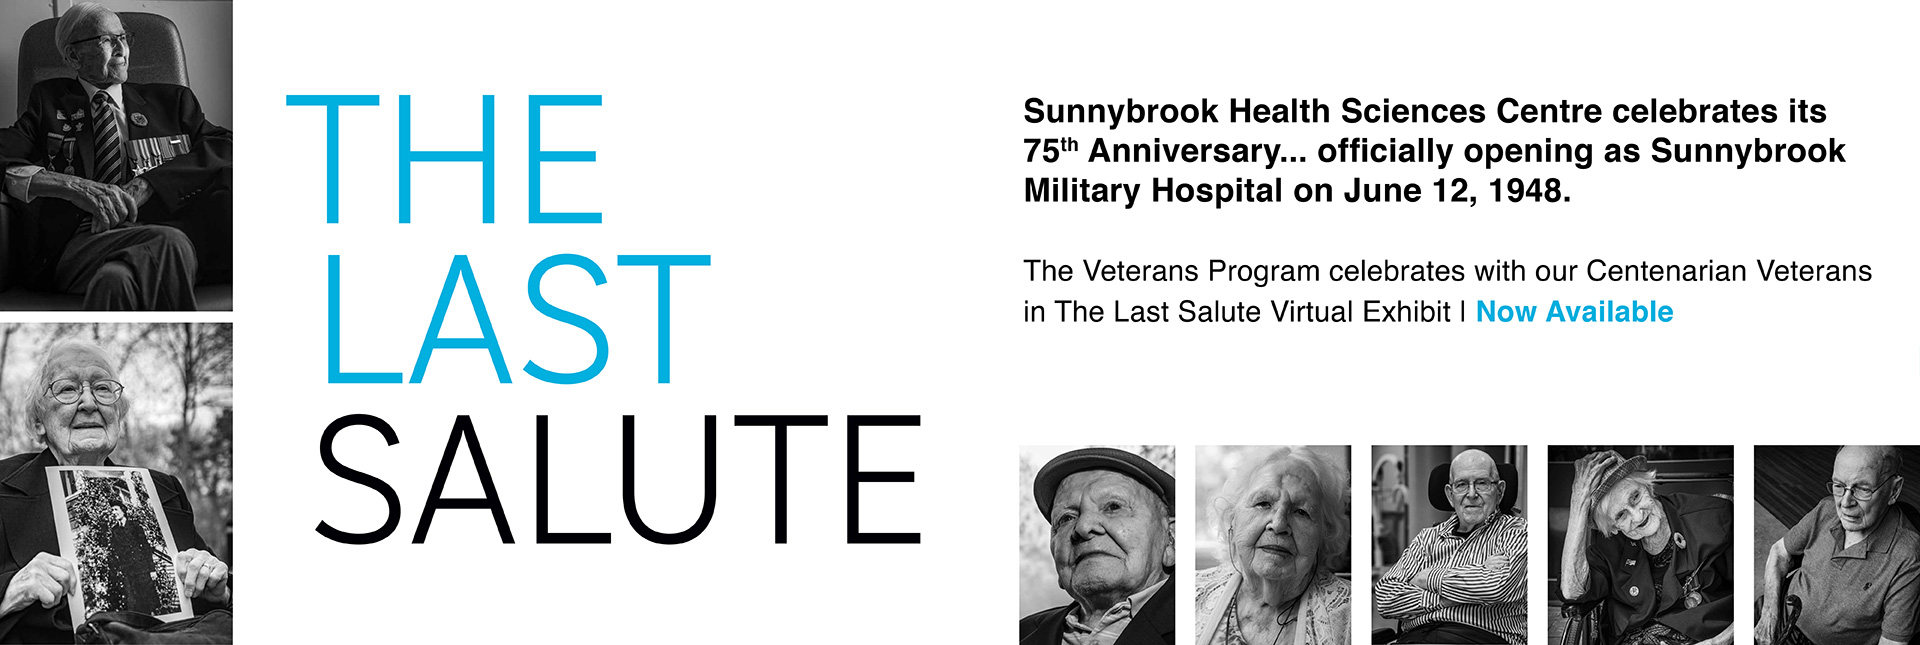 The Last Salute: Sunnybrook Health Sciences Centre celebrates its 75th anniversary officially opening as Sunnybrook military hospital on June 12 1948. The Veterans Program celebrates with our centenarian veterans in our Last Salute exhibit now available